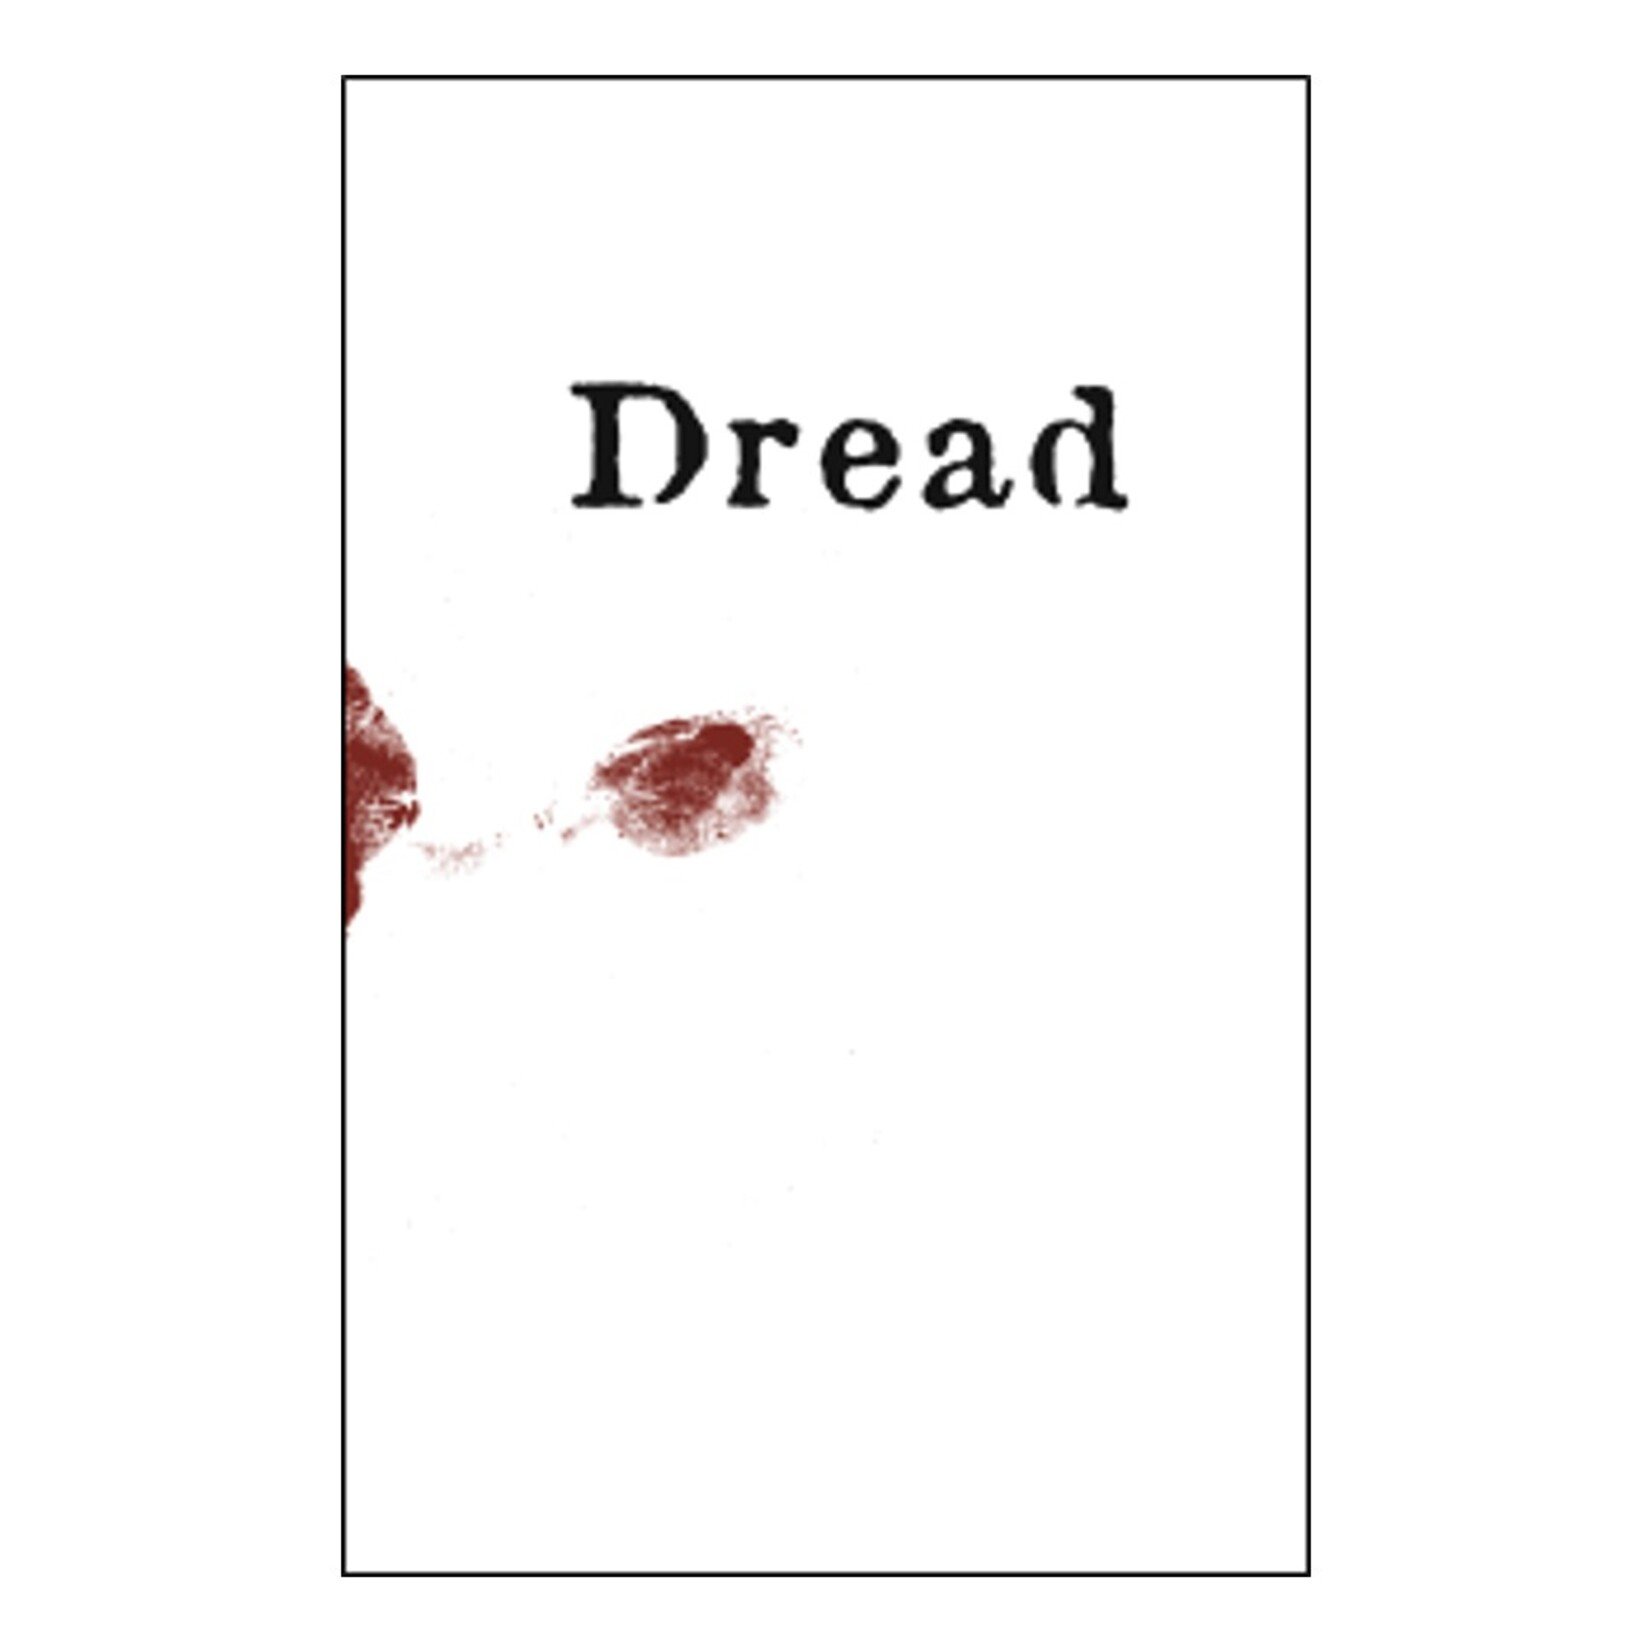 Impossible Dream Dread Roleplaying Game